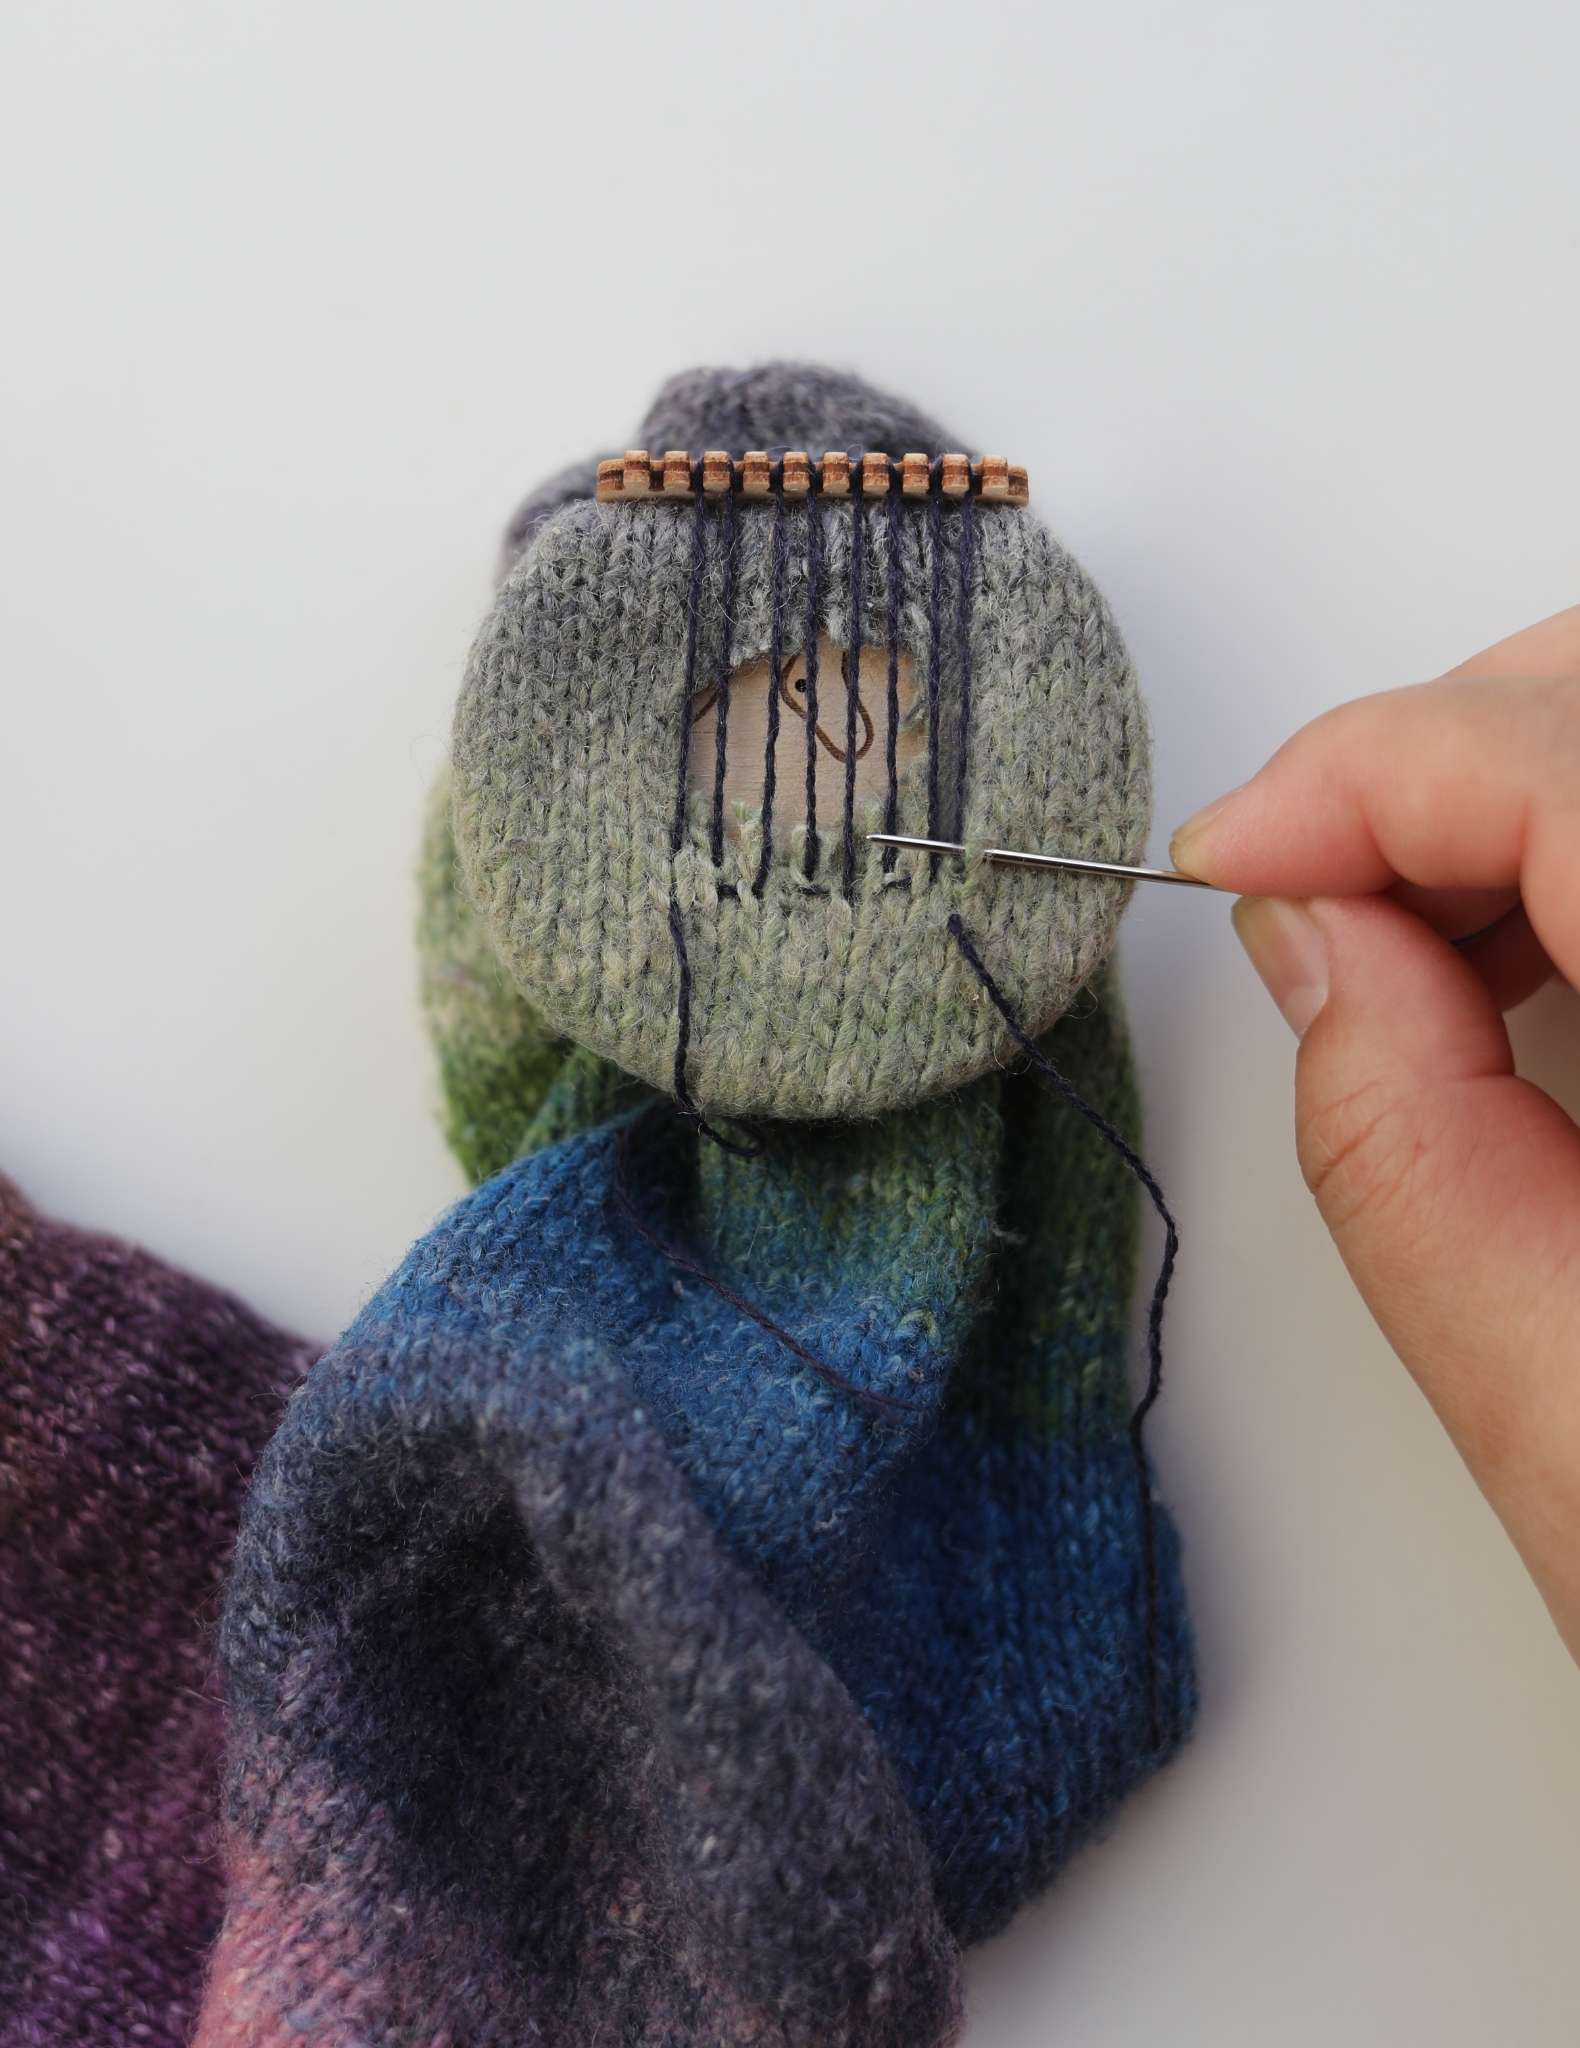 Darning Hand Knit Socks with a Speedweve or Darning Loom ¦ The Corner of  Craft 